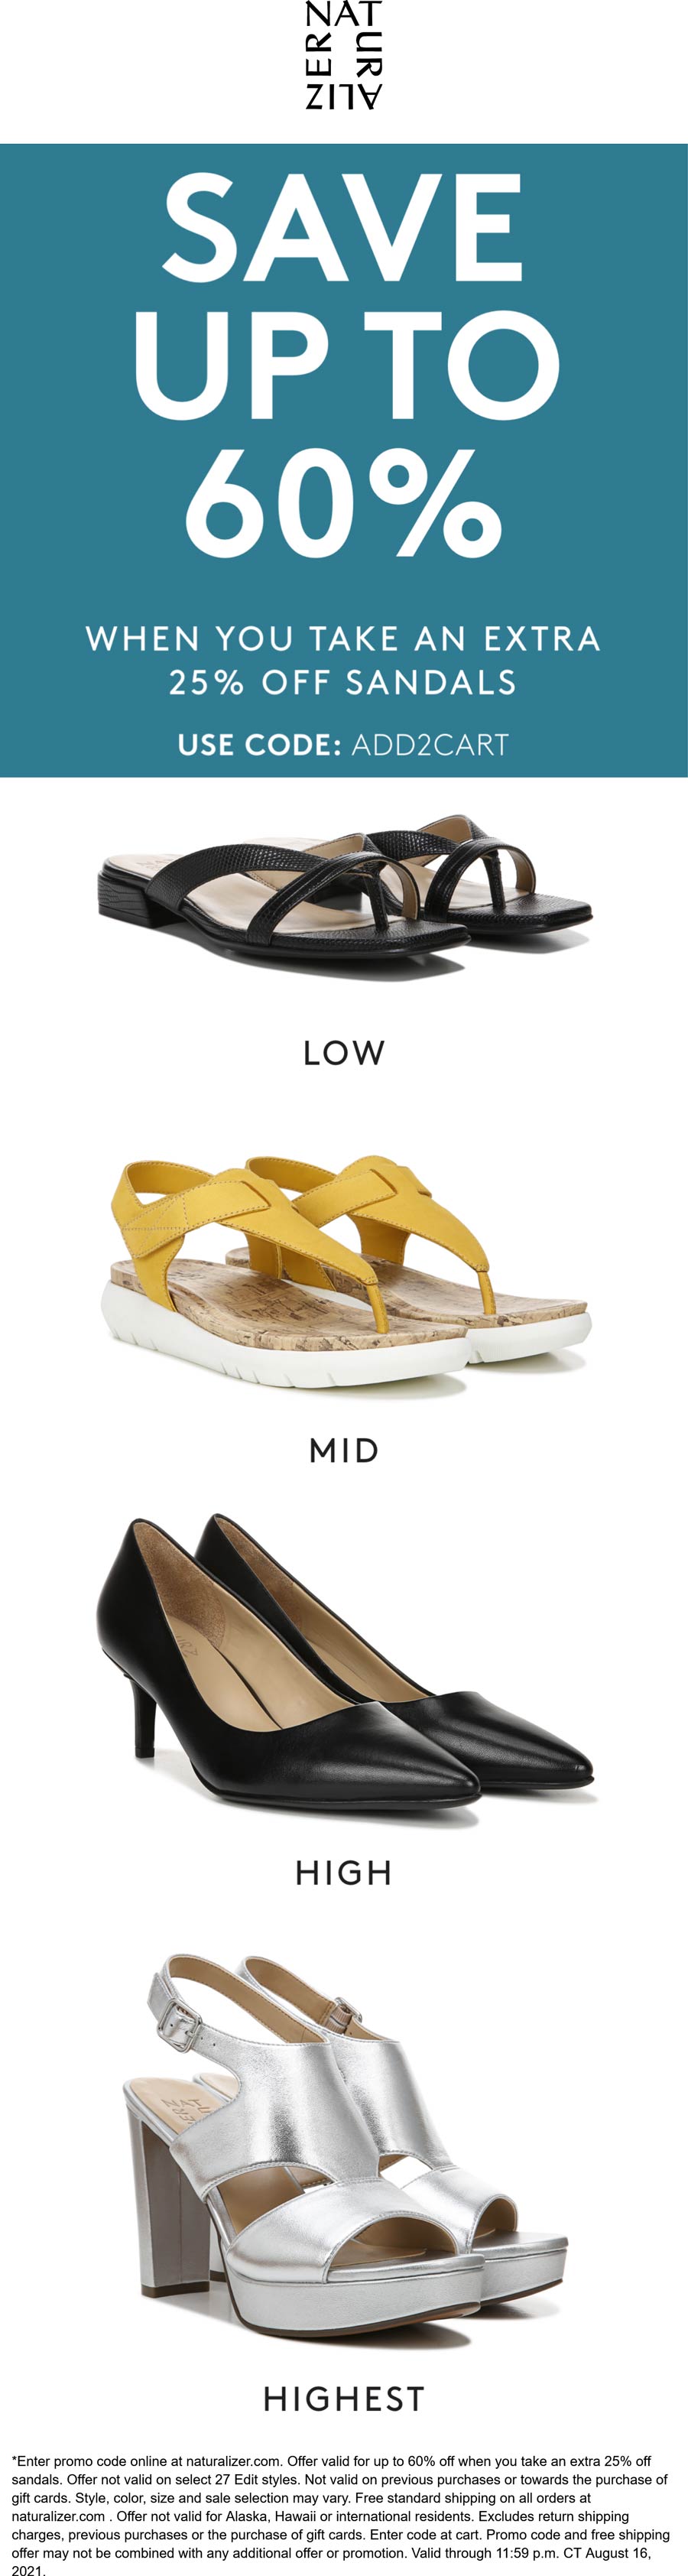 Naturalizer stores Coupon  Extra 25% off sandals at Naturalizer via promo code ADD2CART #naturalizer 